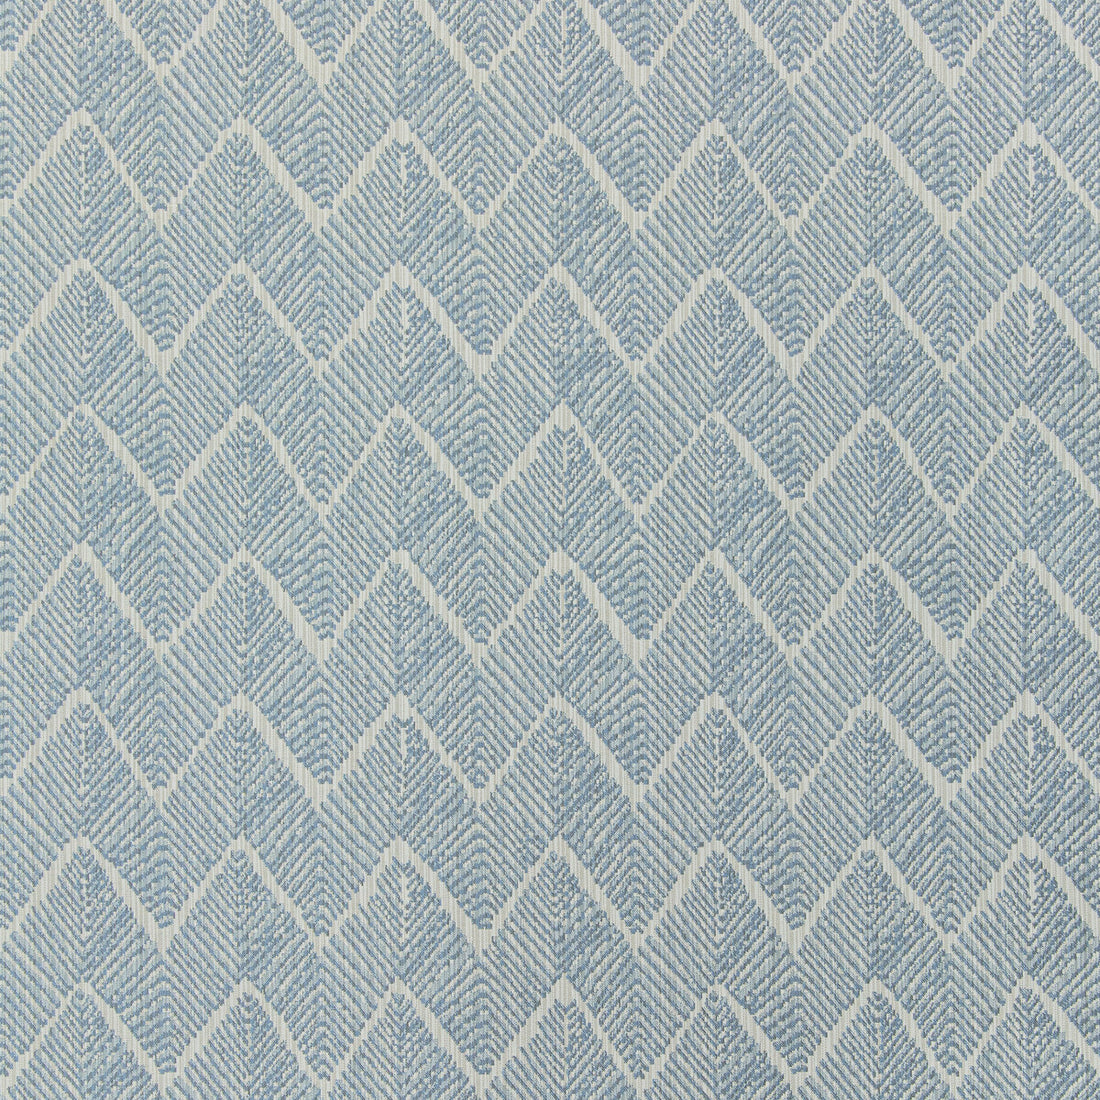 Breezaway fabric in chambray color - pattern 35830.15.0 - by Kravet Design in the Indoor / Outdoor collection